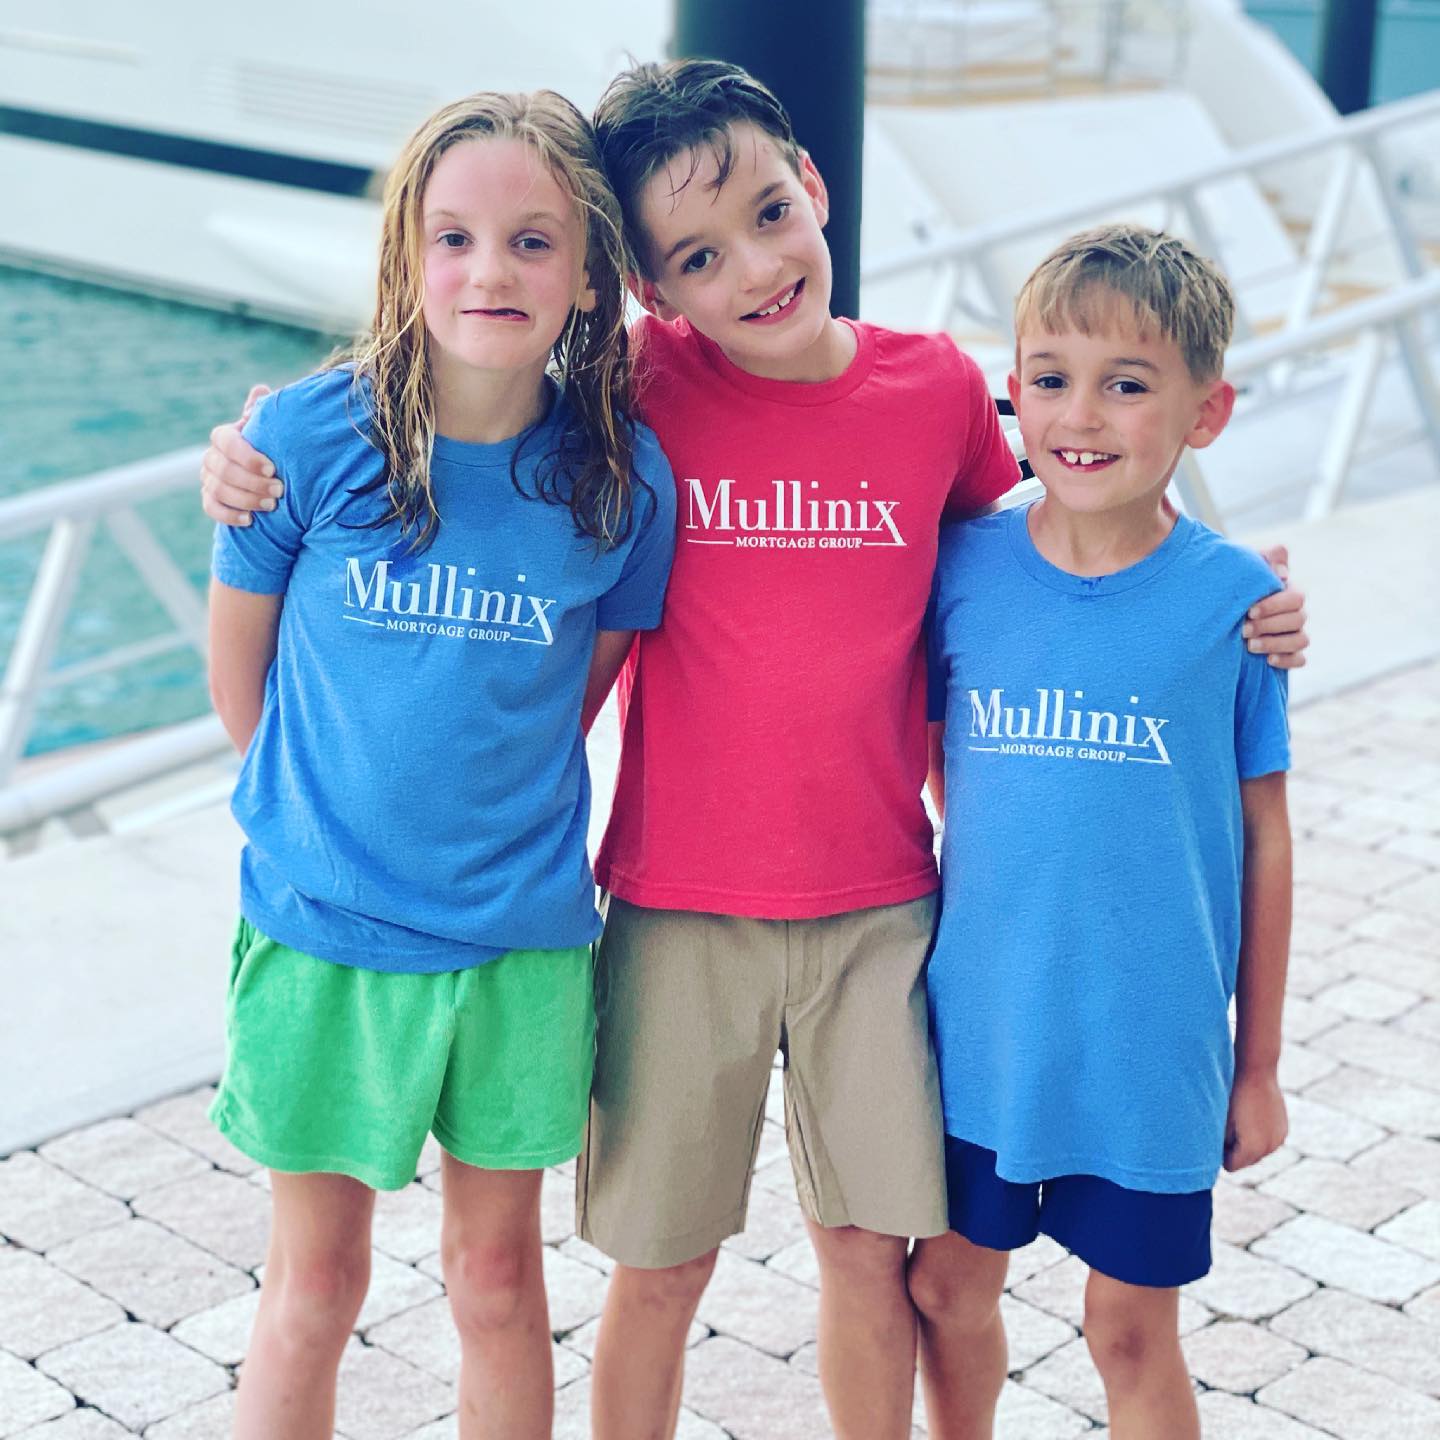 from @mullinixmortgage instagram feed